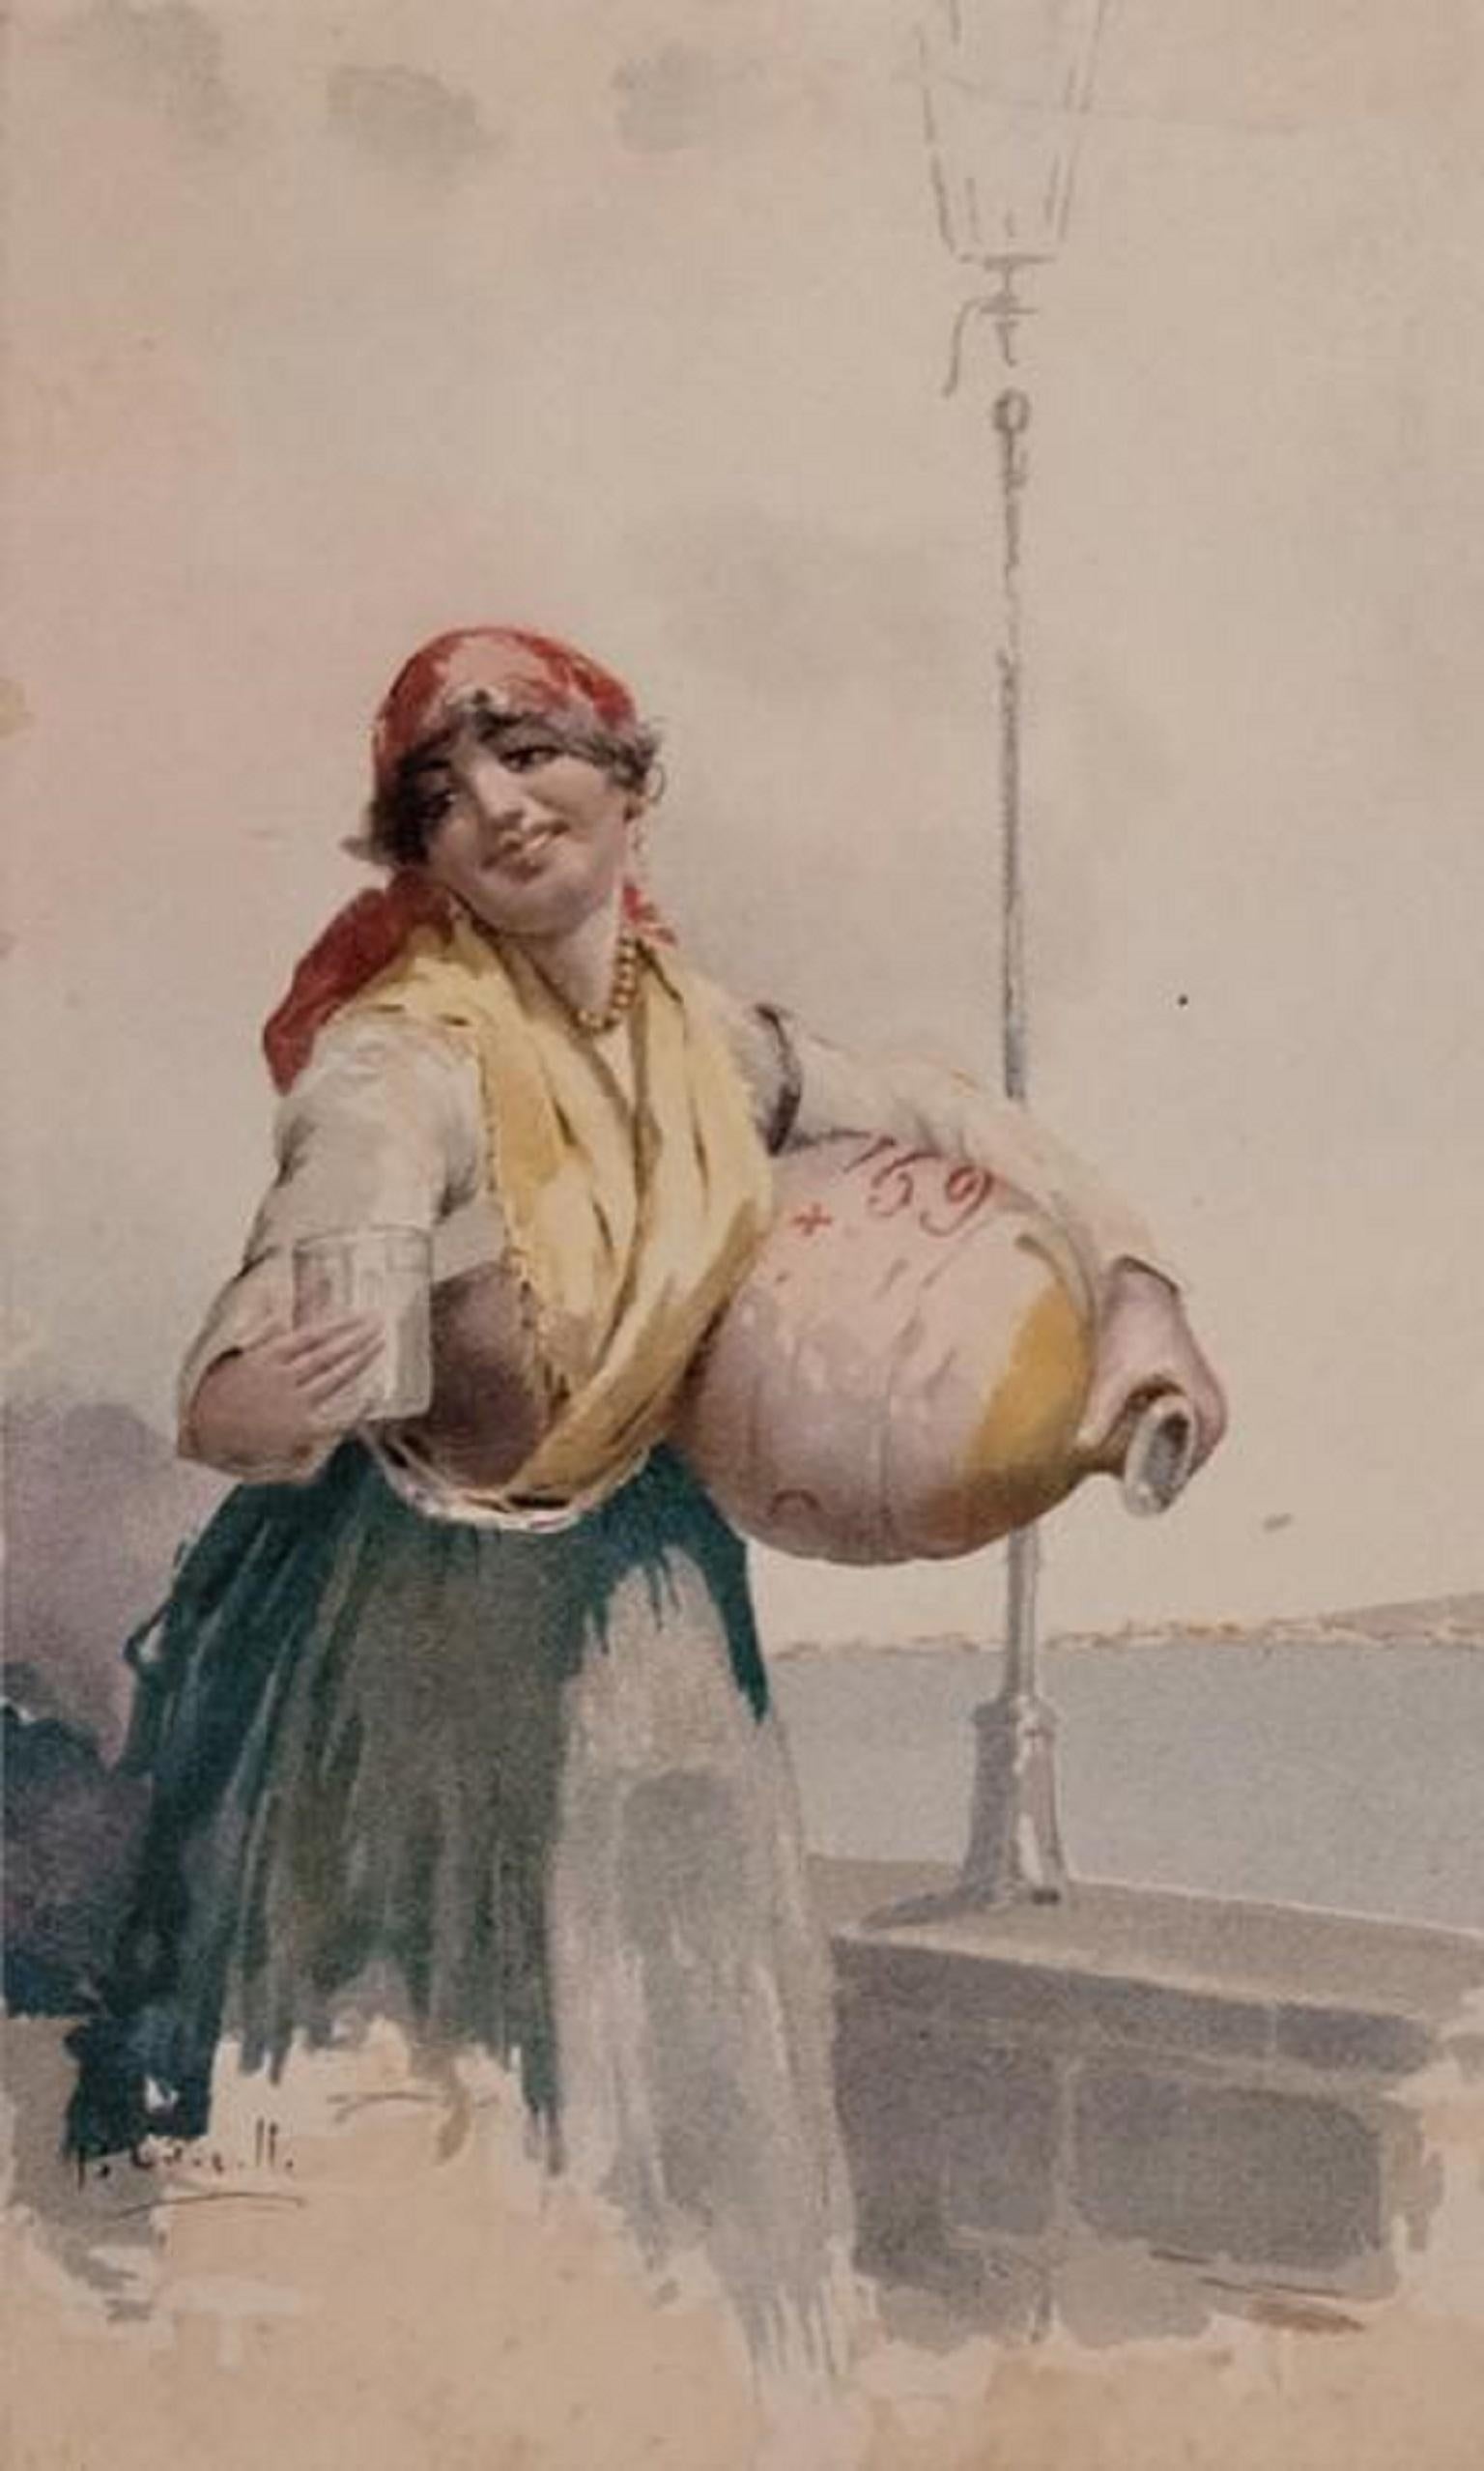 Leopldina Zanetti Borzing 1826-1902 original lithograph “Napolitano Girl with Water Jug”. Delightful Italian original lithograph of a girl from Napoli by the sea with a water jug. Lithograph is displayed in original black lacquer frame with original